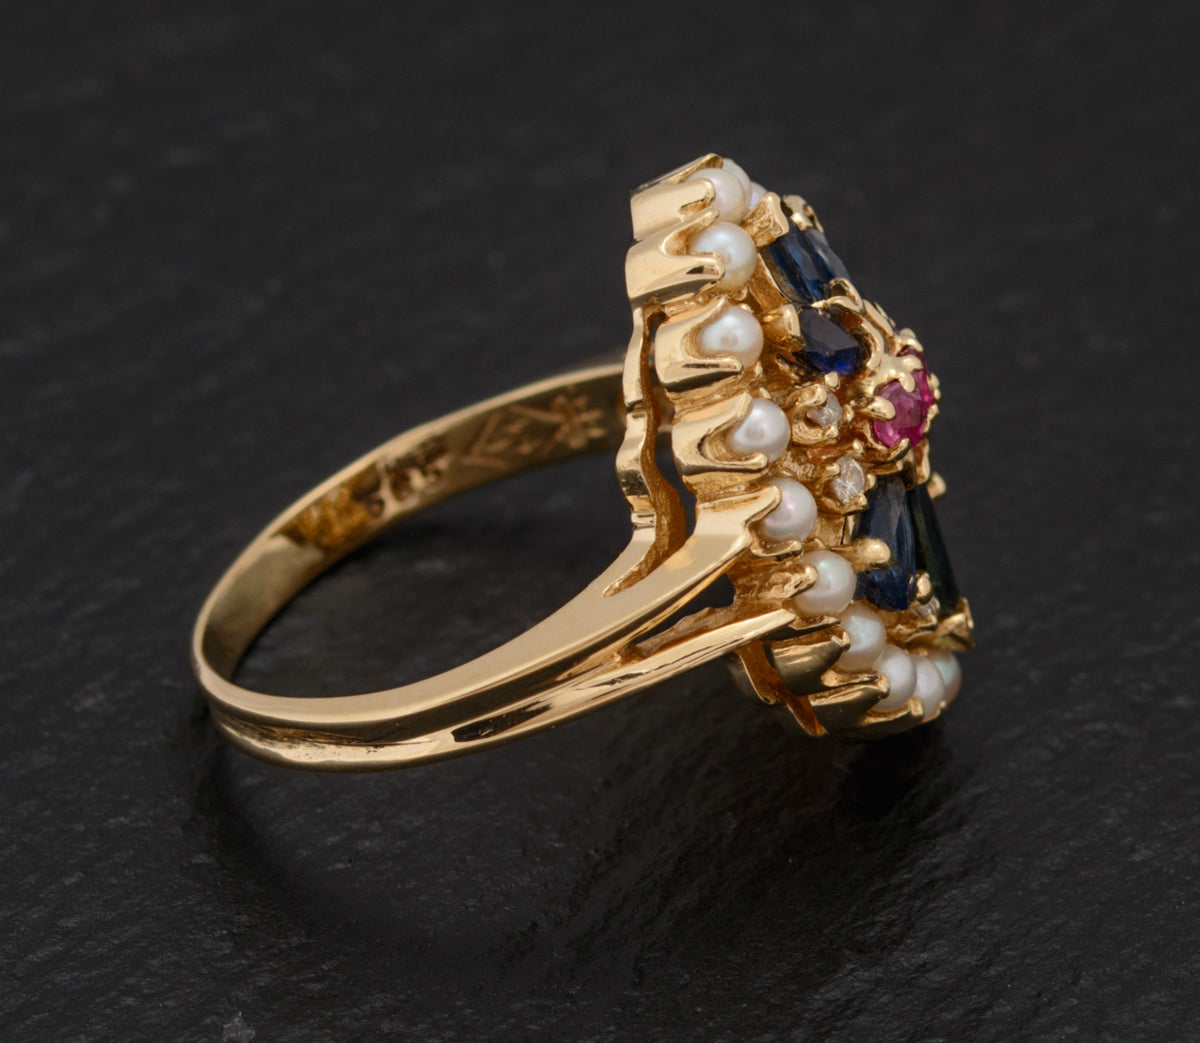 Vintage Franklin Mint 14K Gold Cocktail Ring Sapphire/Ruby/Diamond/Pearl (A1534)